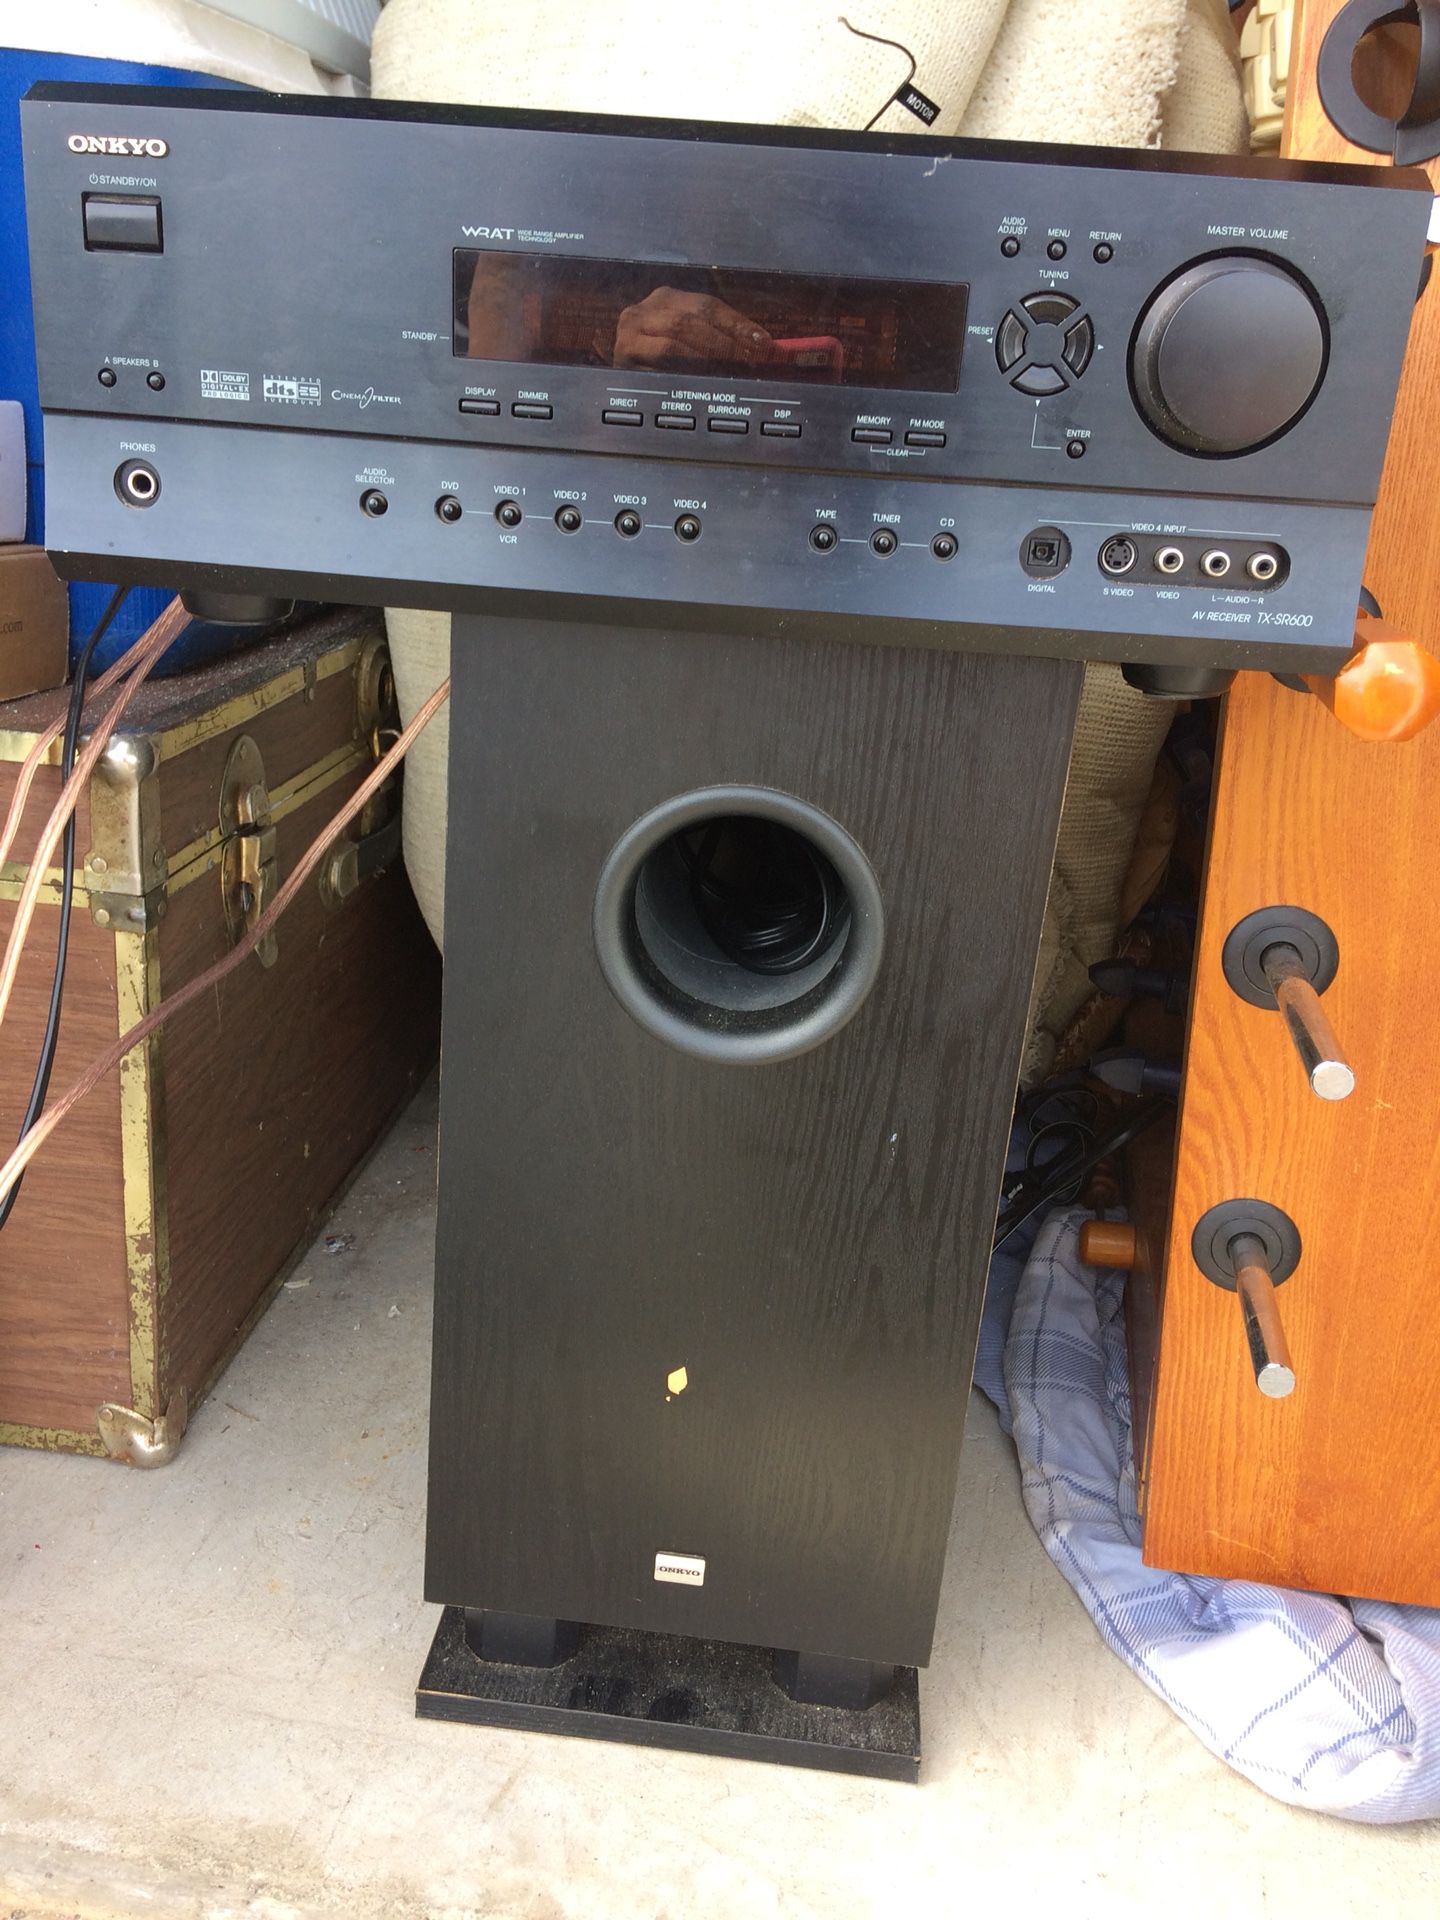 Onkyo receiver in subwoofer